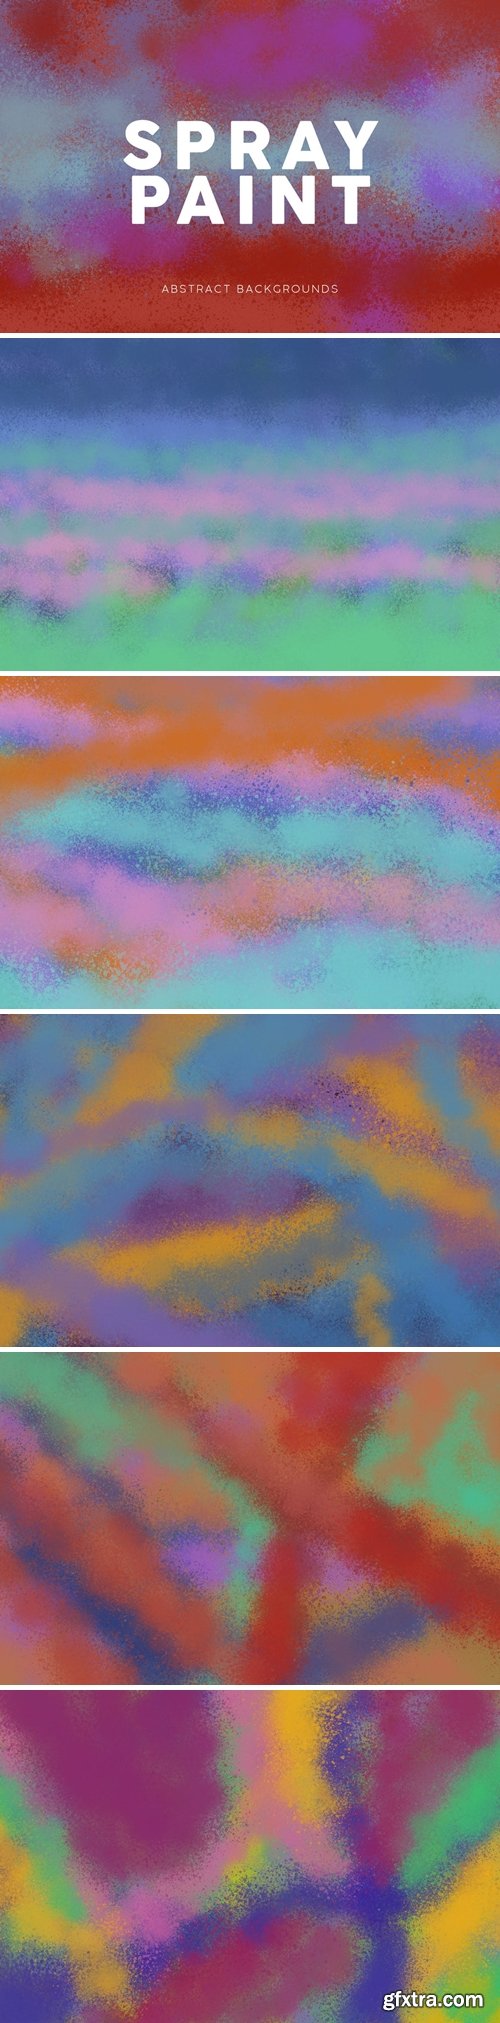 Spray Paint Colorful Backgrounds